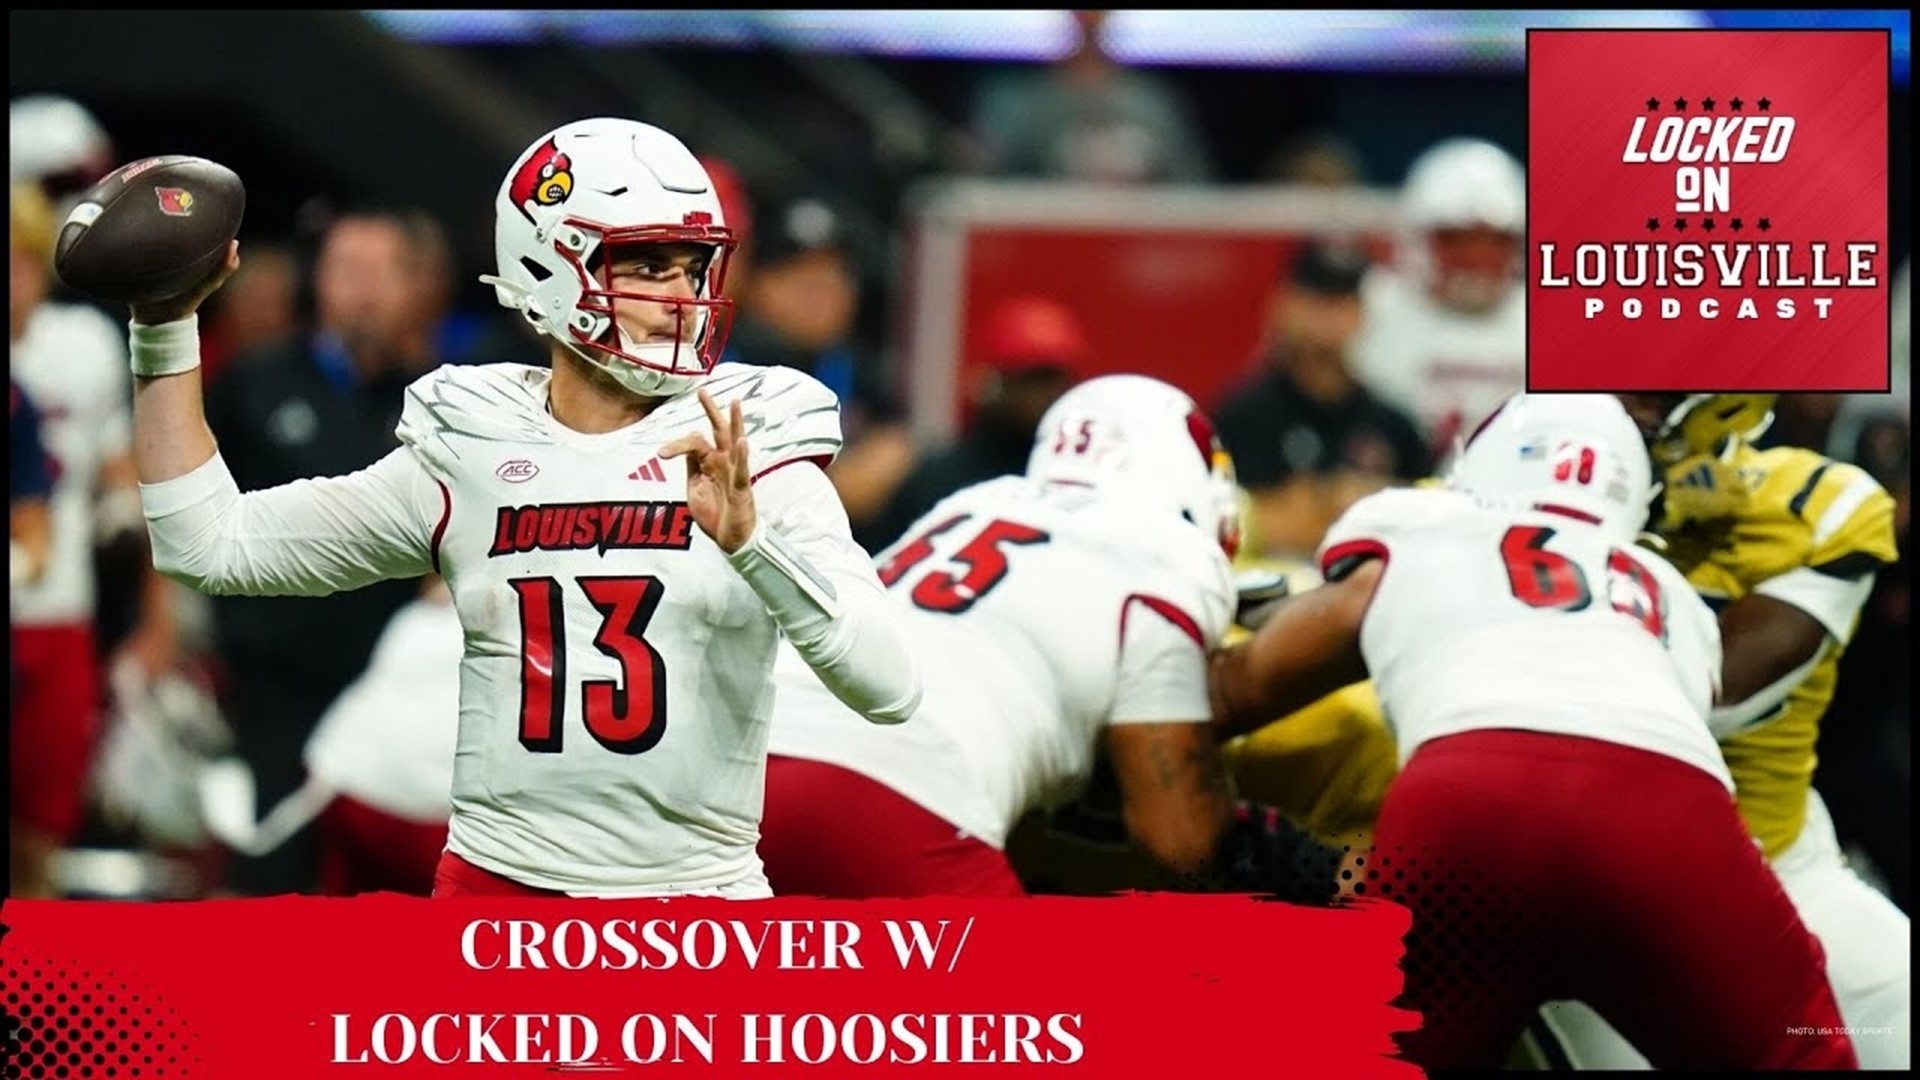 What should Louisville Cardinals' fans expect from the Indiana Hoosiers on Saturday?